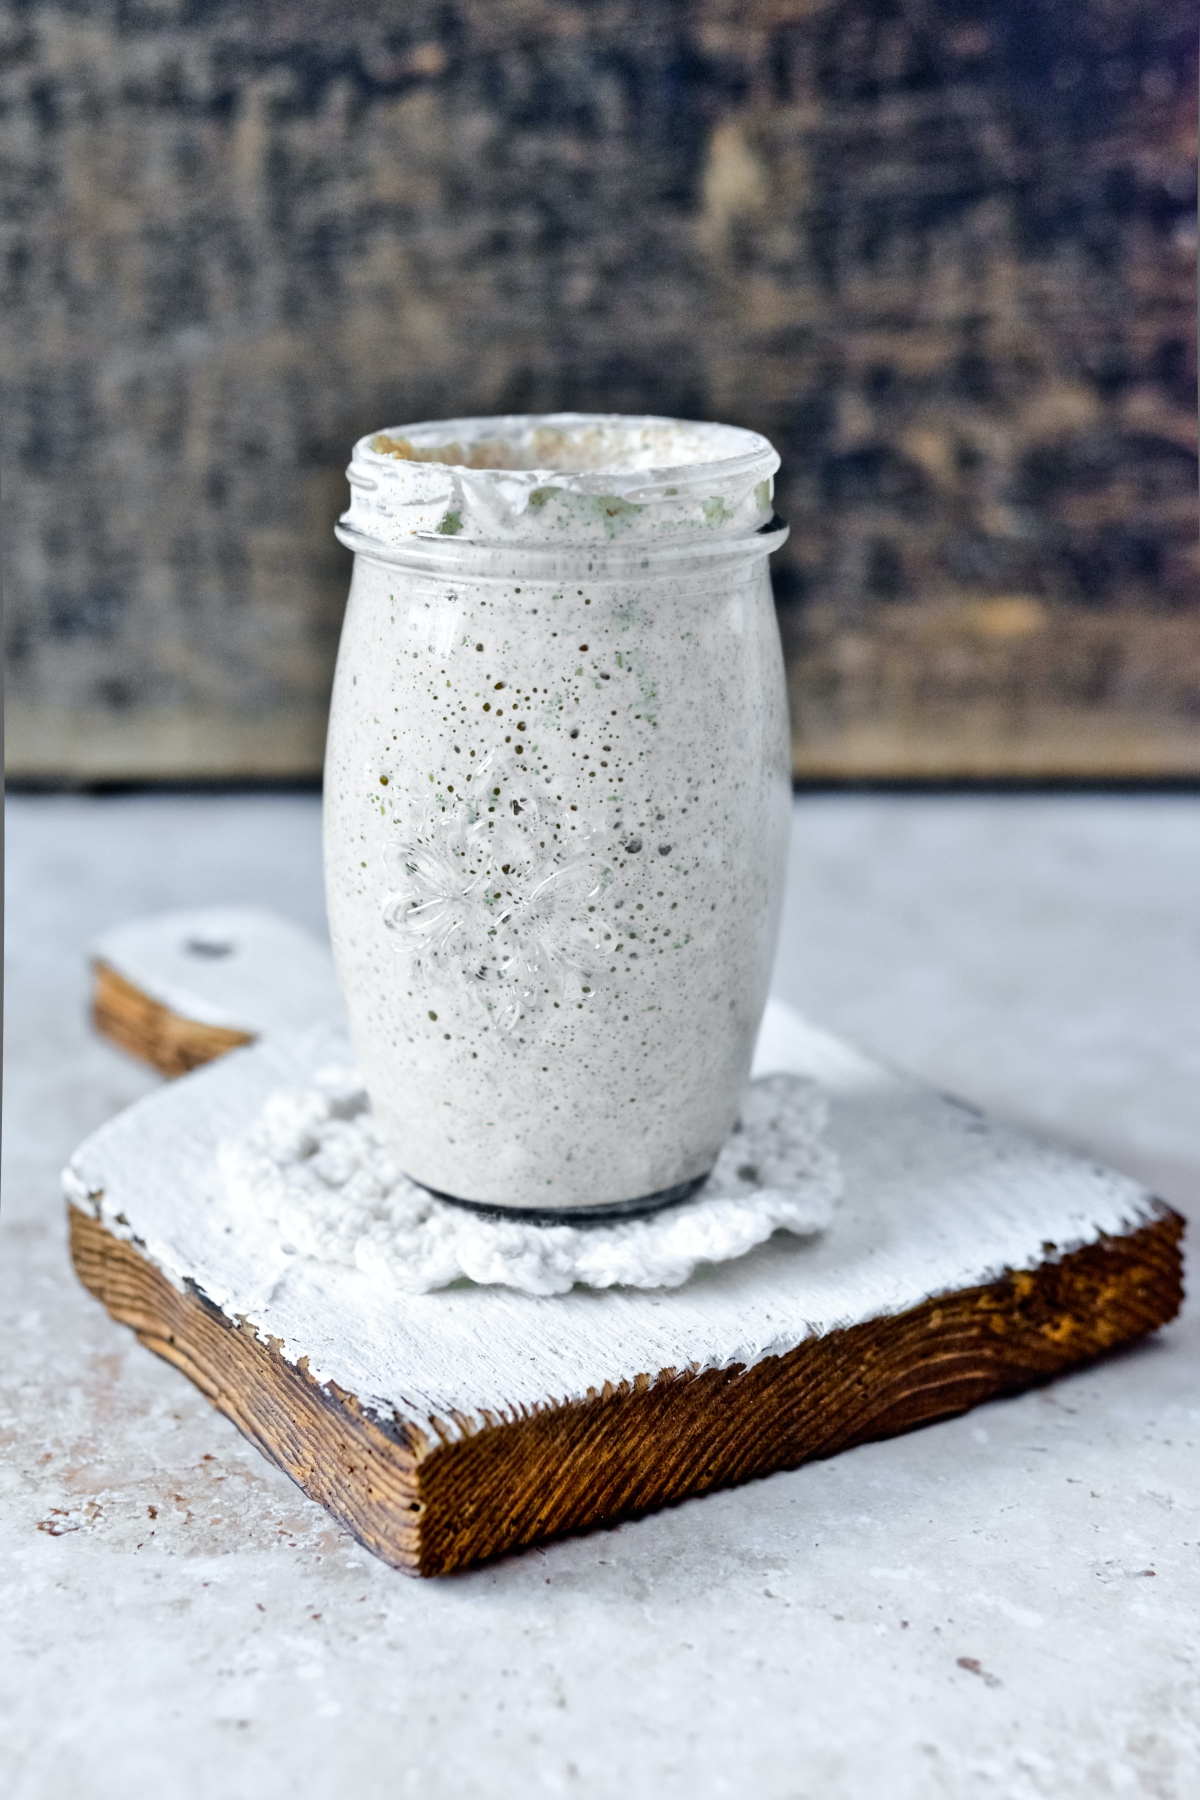 Start from Scratch: Make Your Own Sourdough Starter in 7 Days